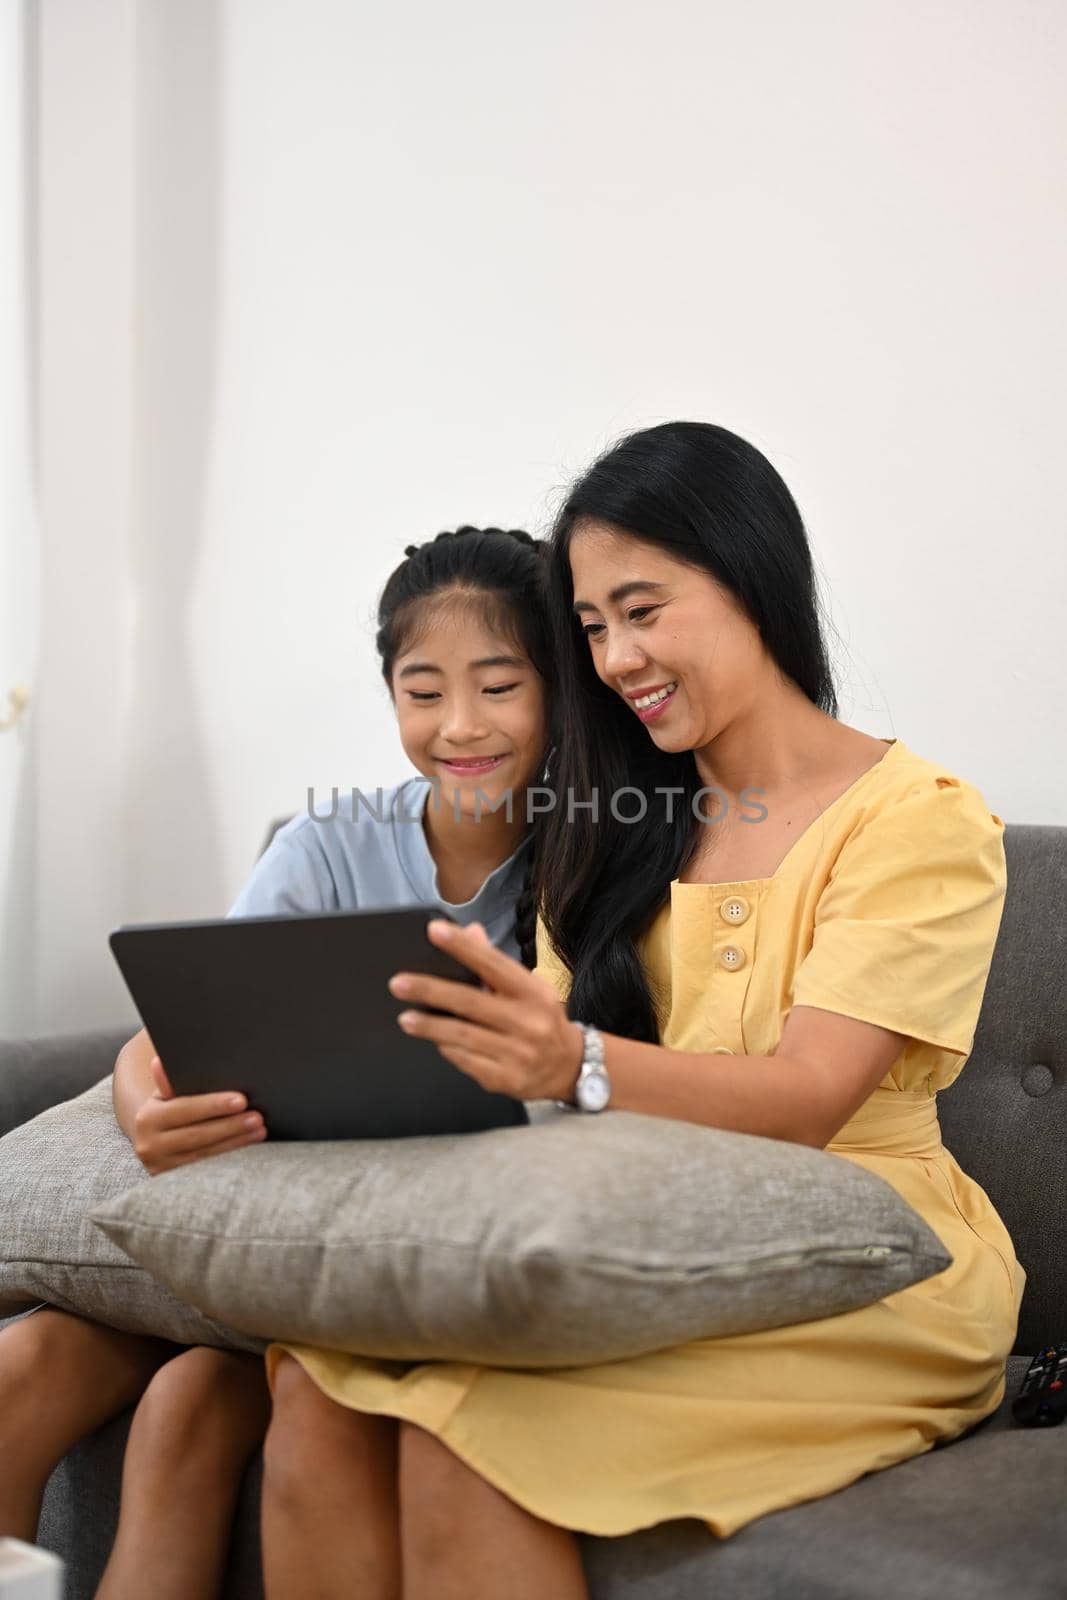 Asian mom and daughter having fun browsing internet on digital tablet together on sofa.